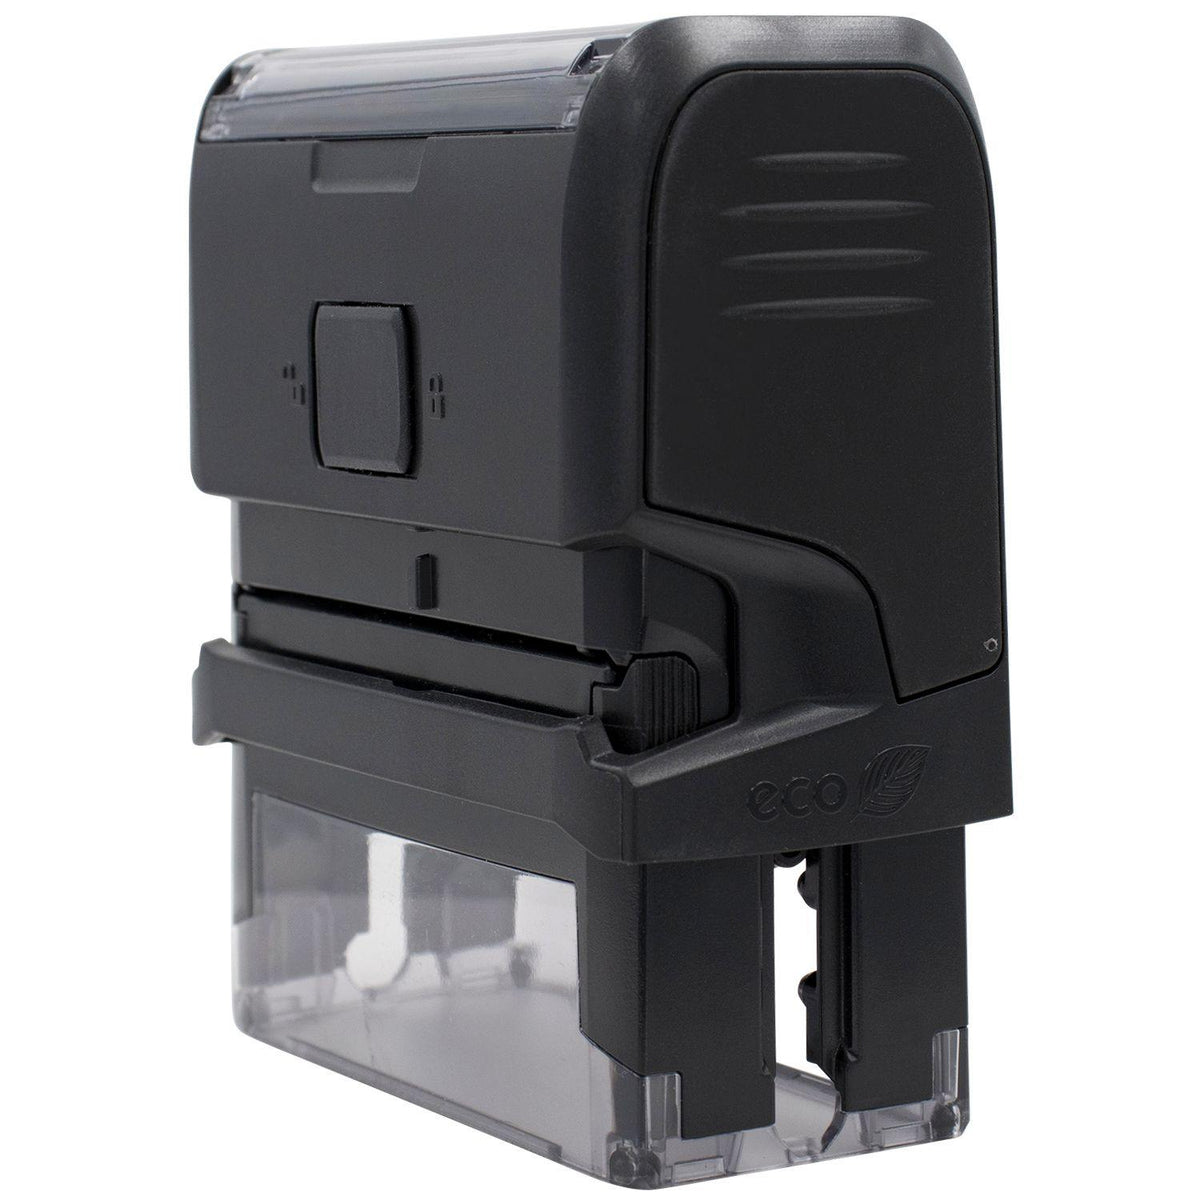 Large Self Inking Dnr Stamp - Engineer Seal Stamps - Brand_Trodat, Impression Size_Large, Stamp Type_Self-Inking Stamp, Type of Use_Medical Office